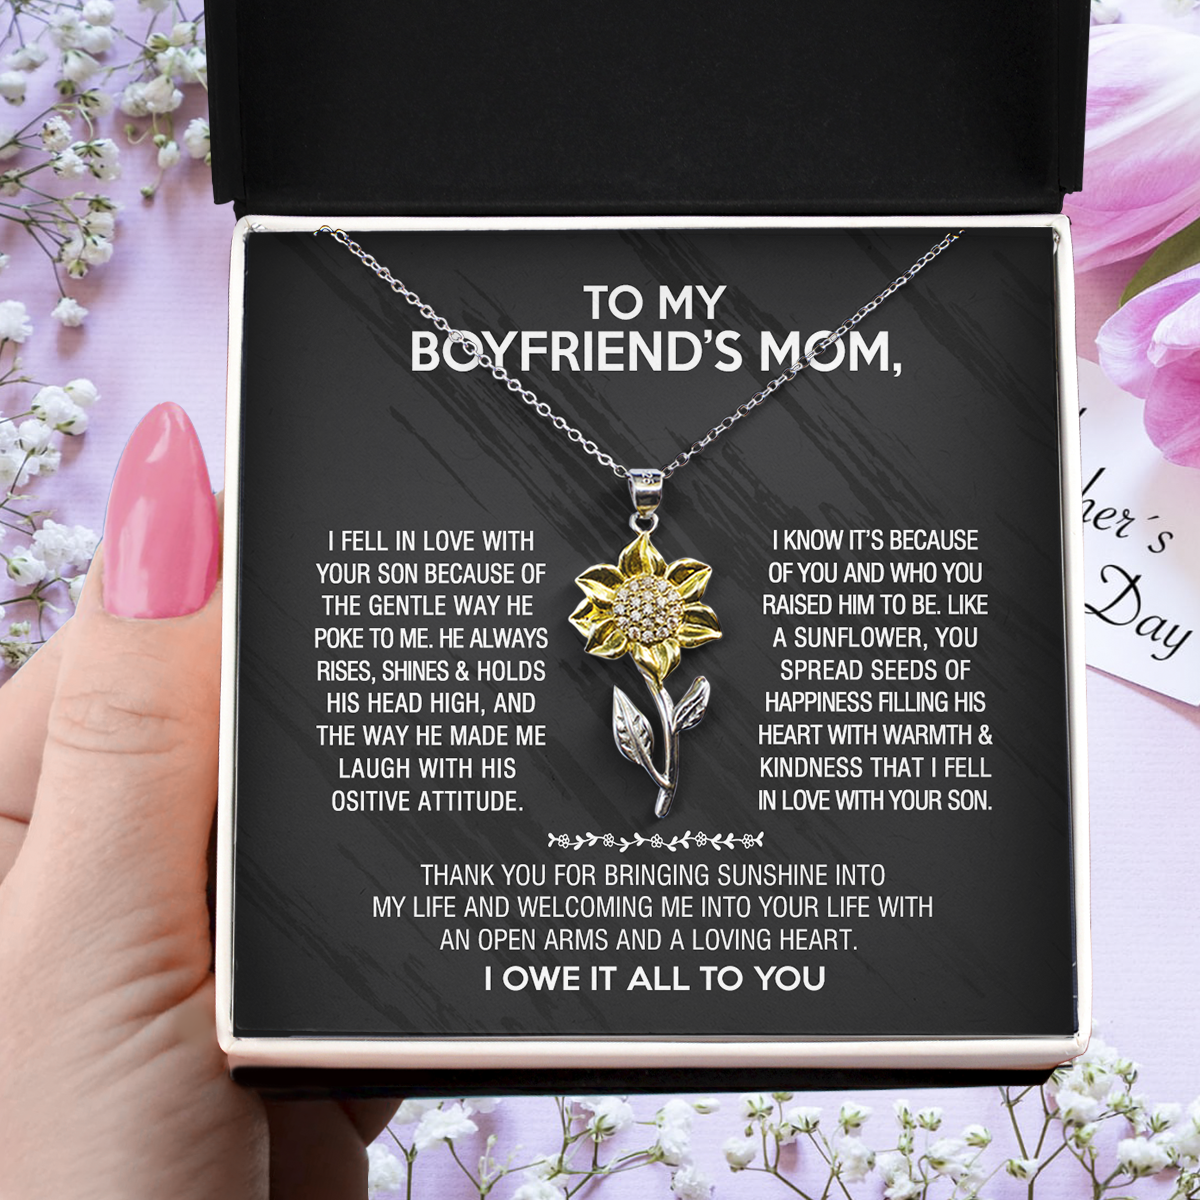 Sunflower Pendant Necklace for Boyfriend's Mom - I owe it all to you - JWshinee